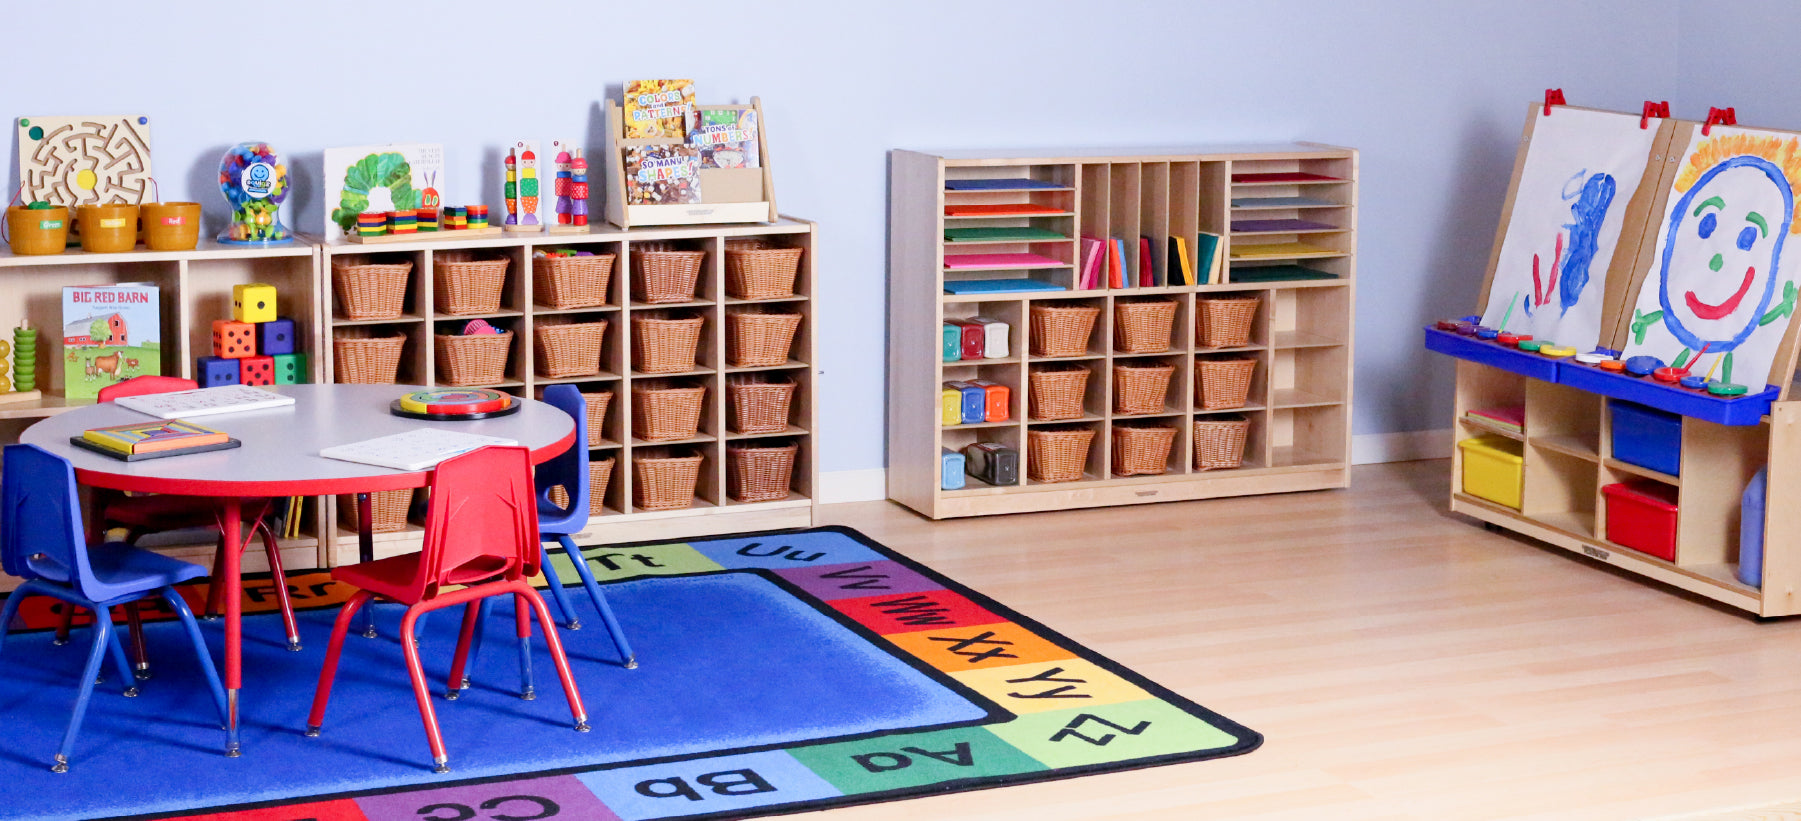 pre-k classroom with a colorful rug and table and chairs